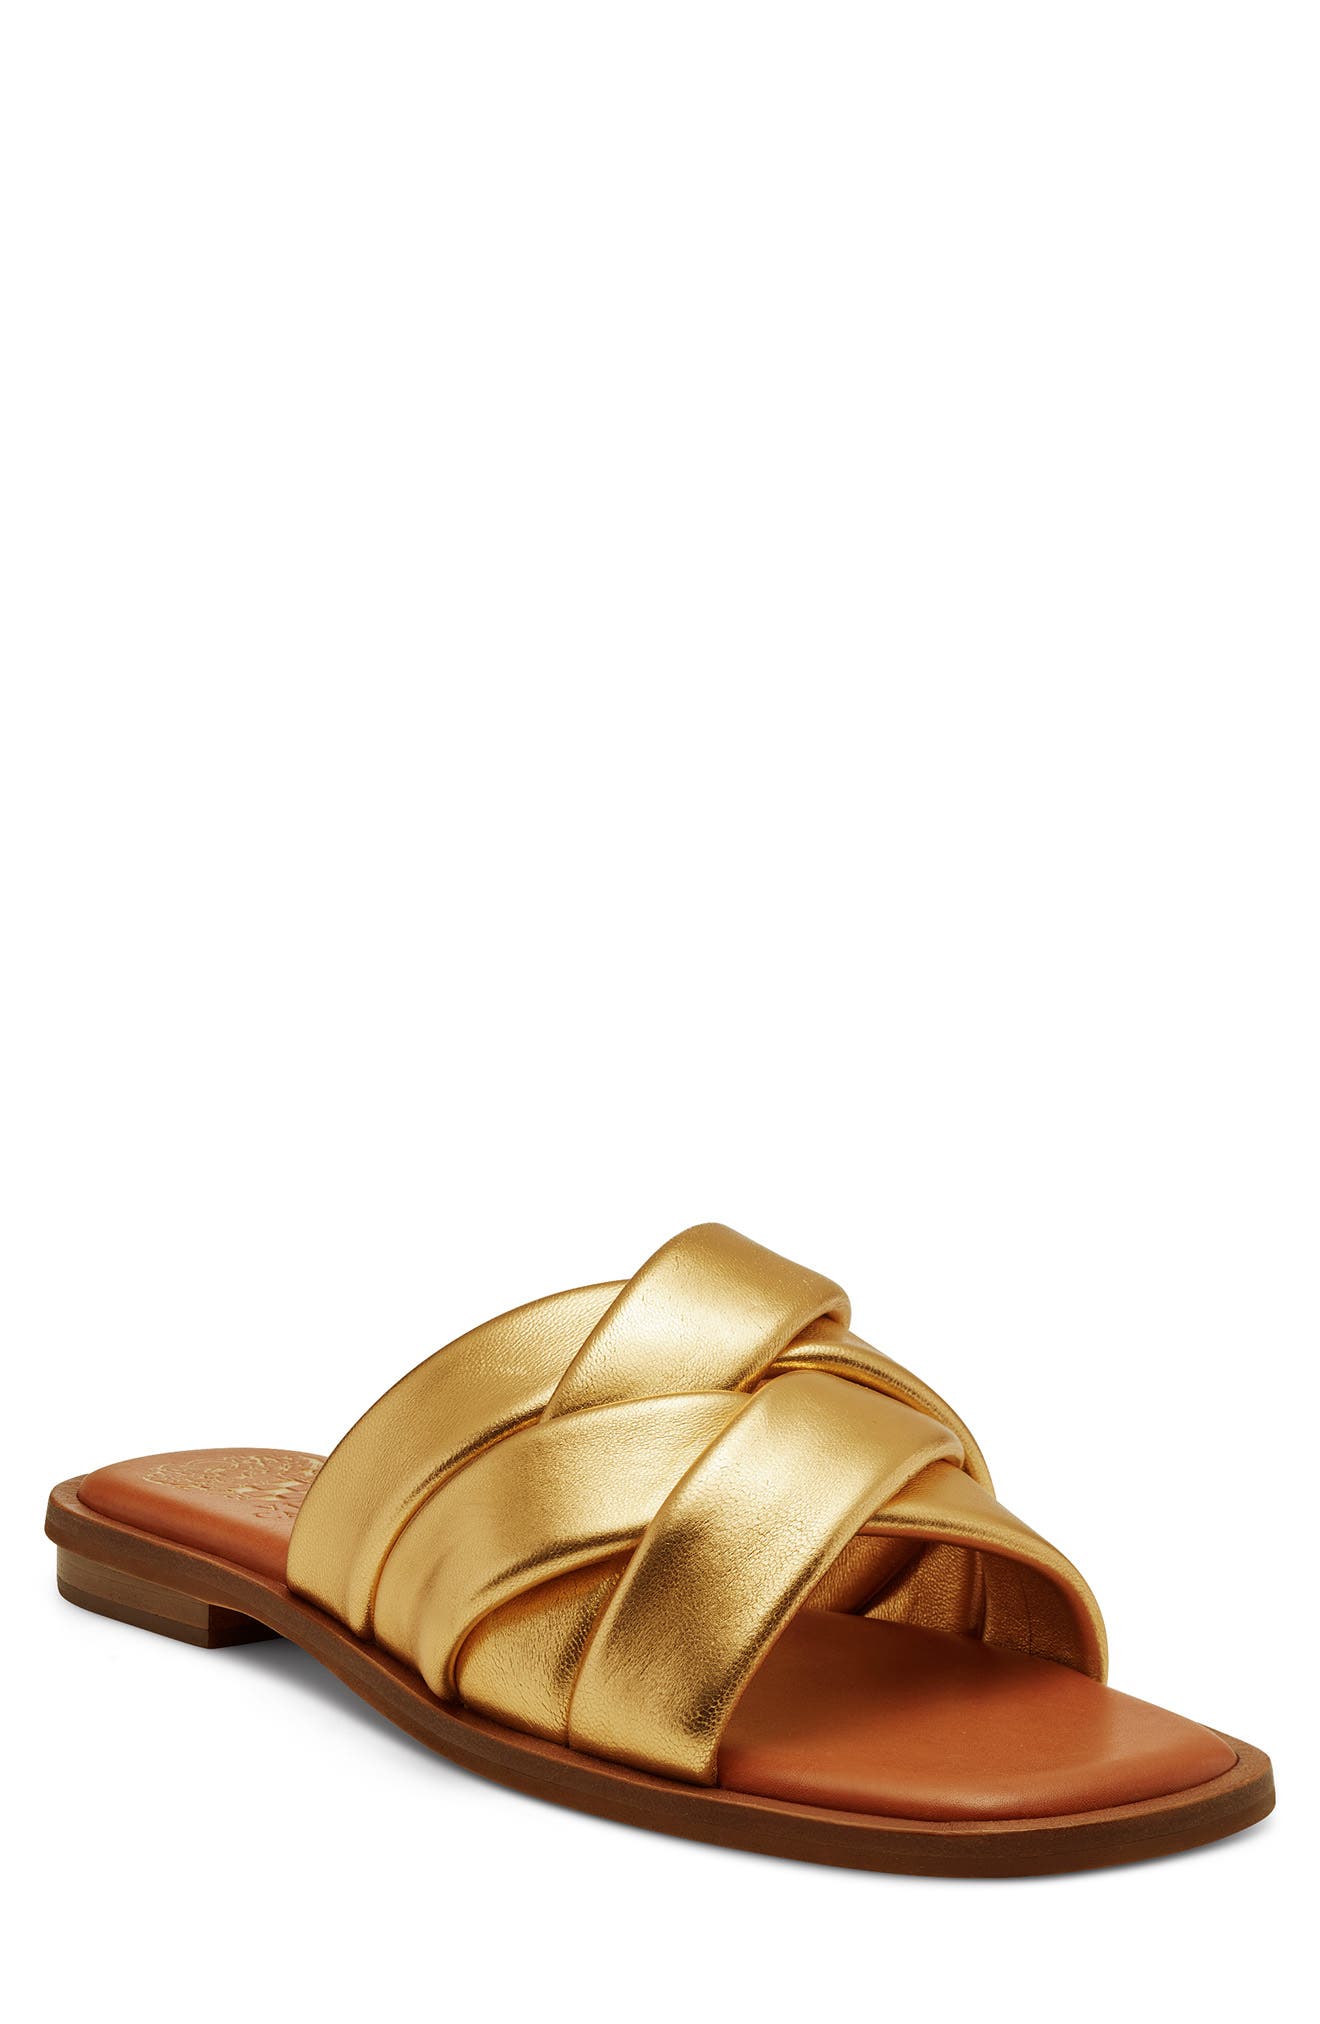 Vince Camuto Northala Woven Leather Slide Sandal In Goldy | ModeSens